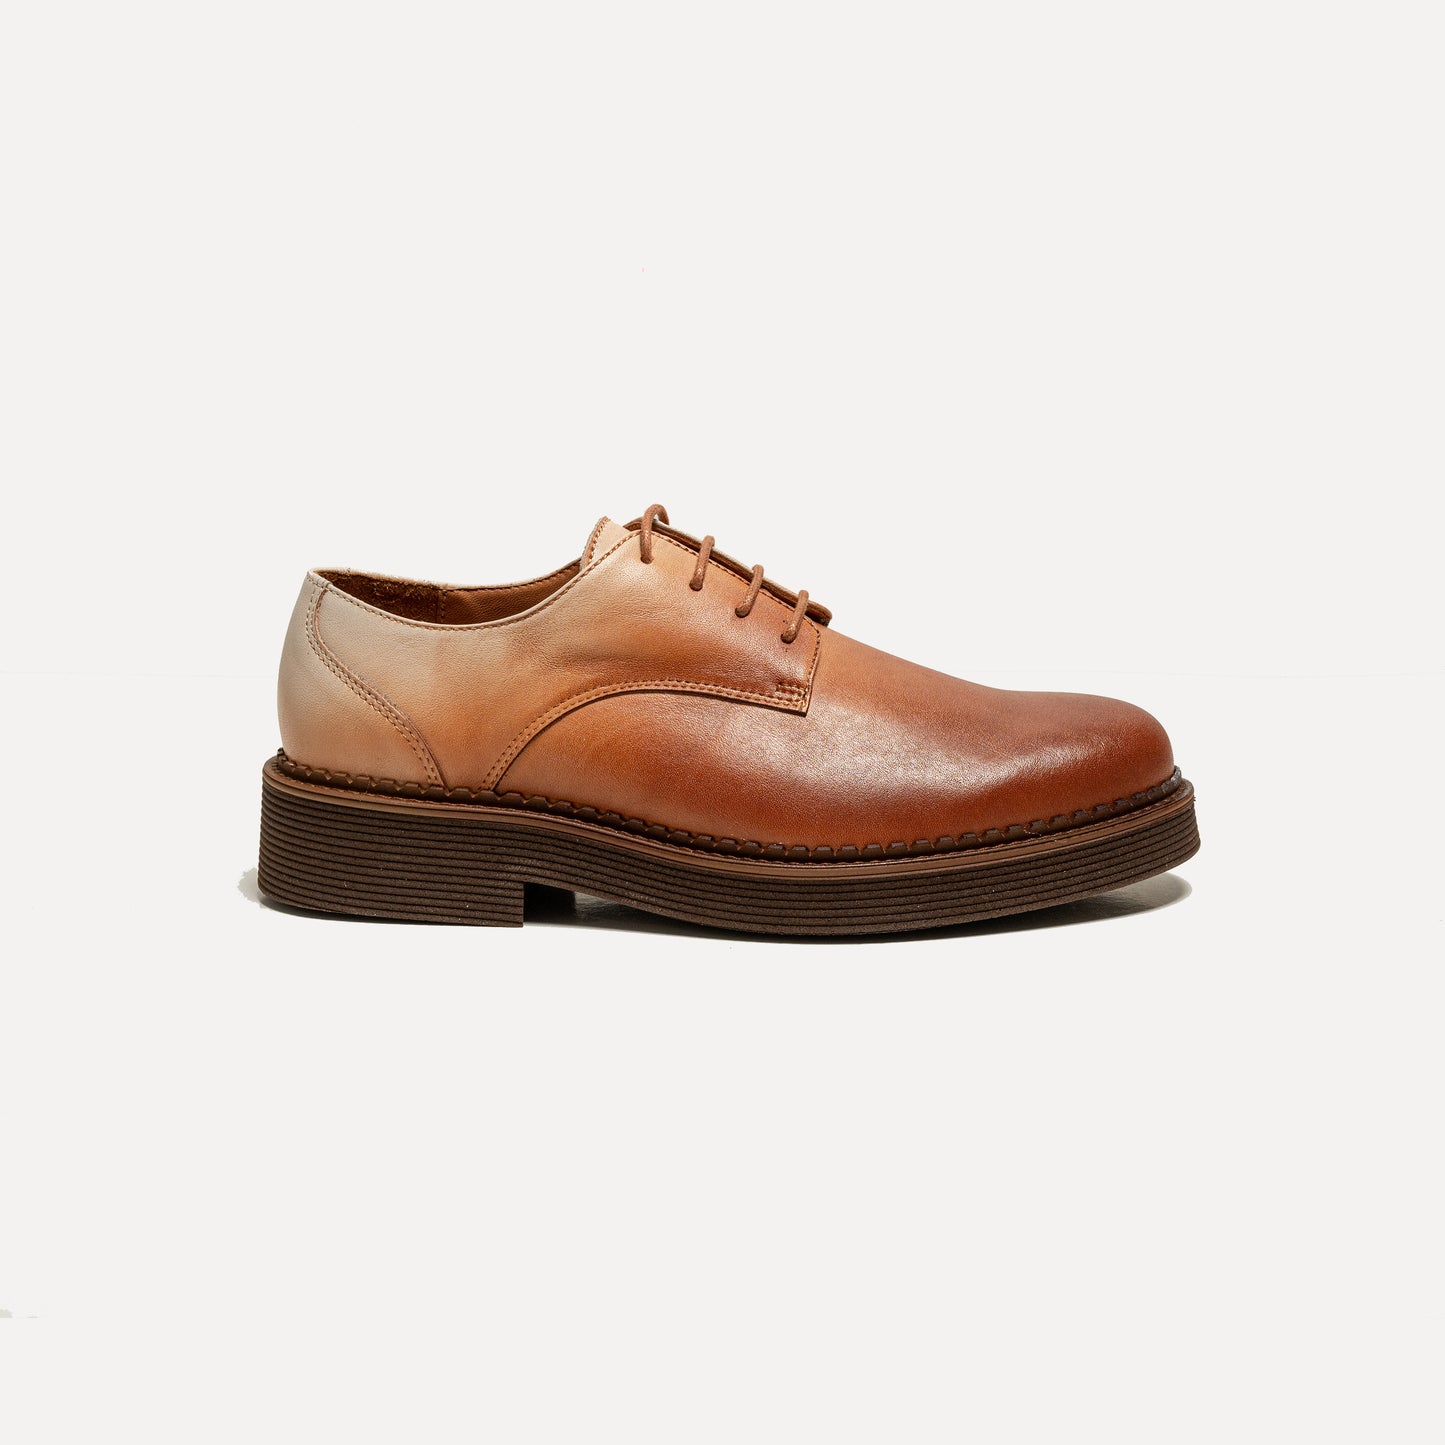 Arcas - hand-painted leather lace up shoes